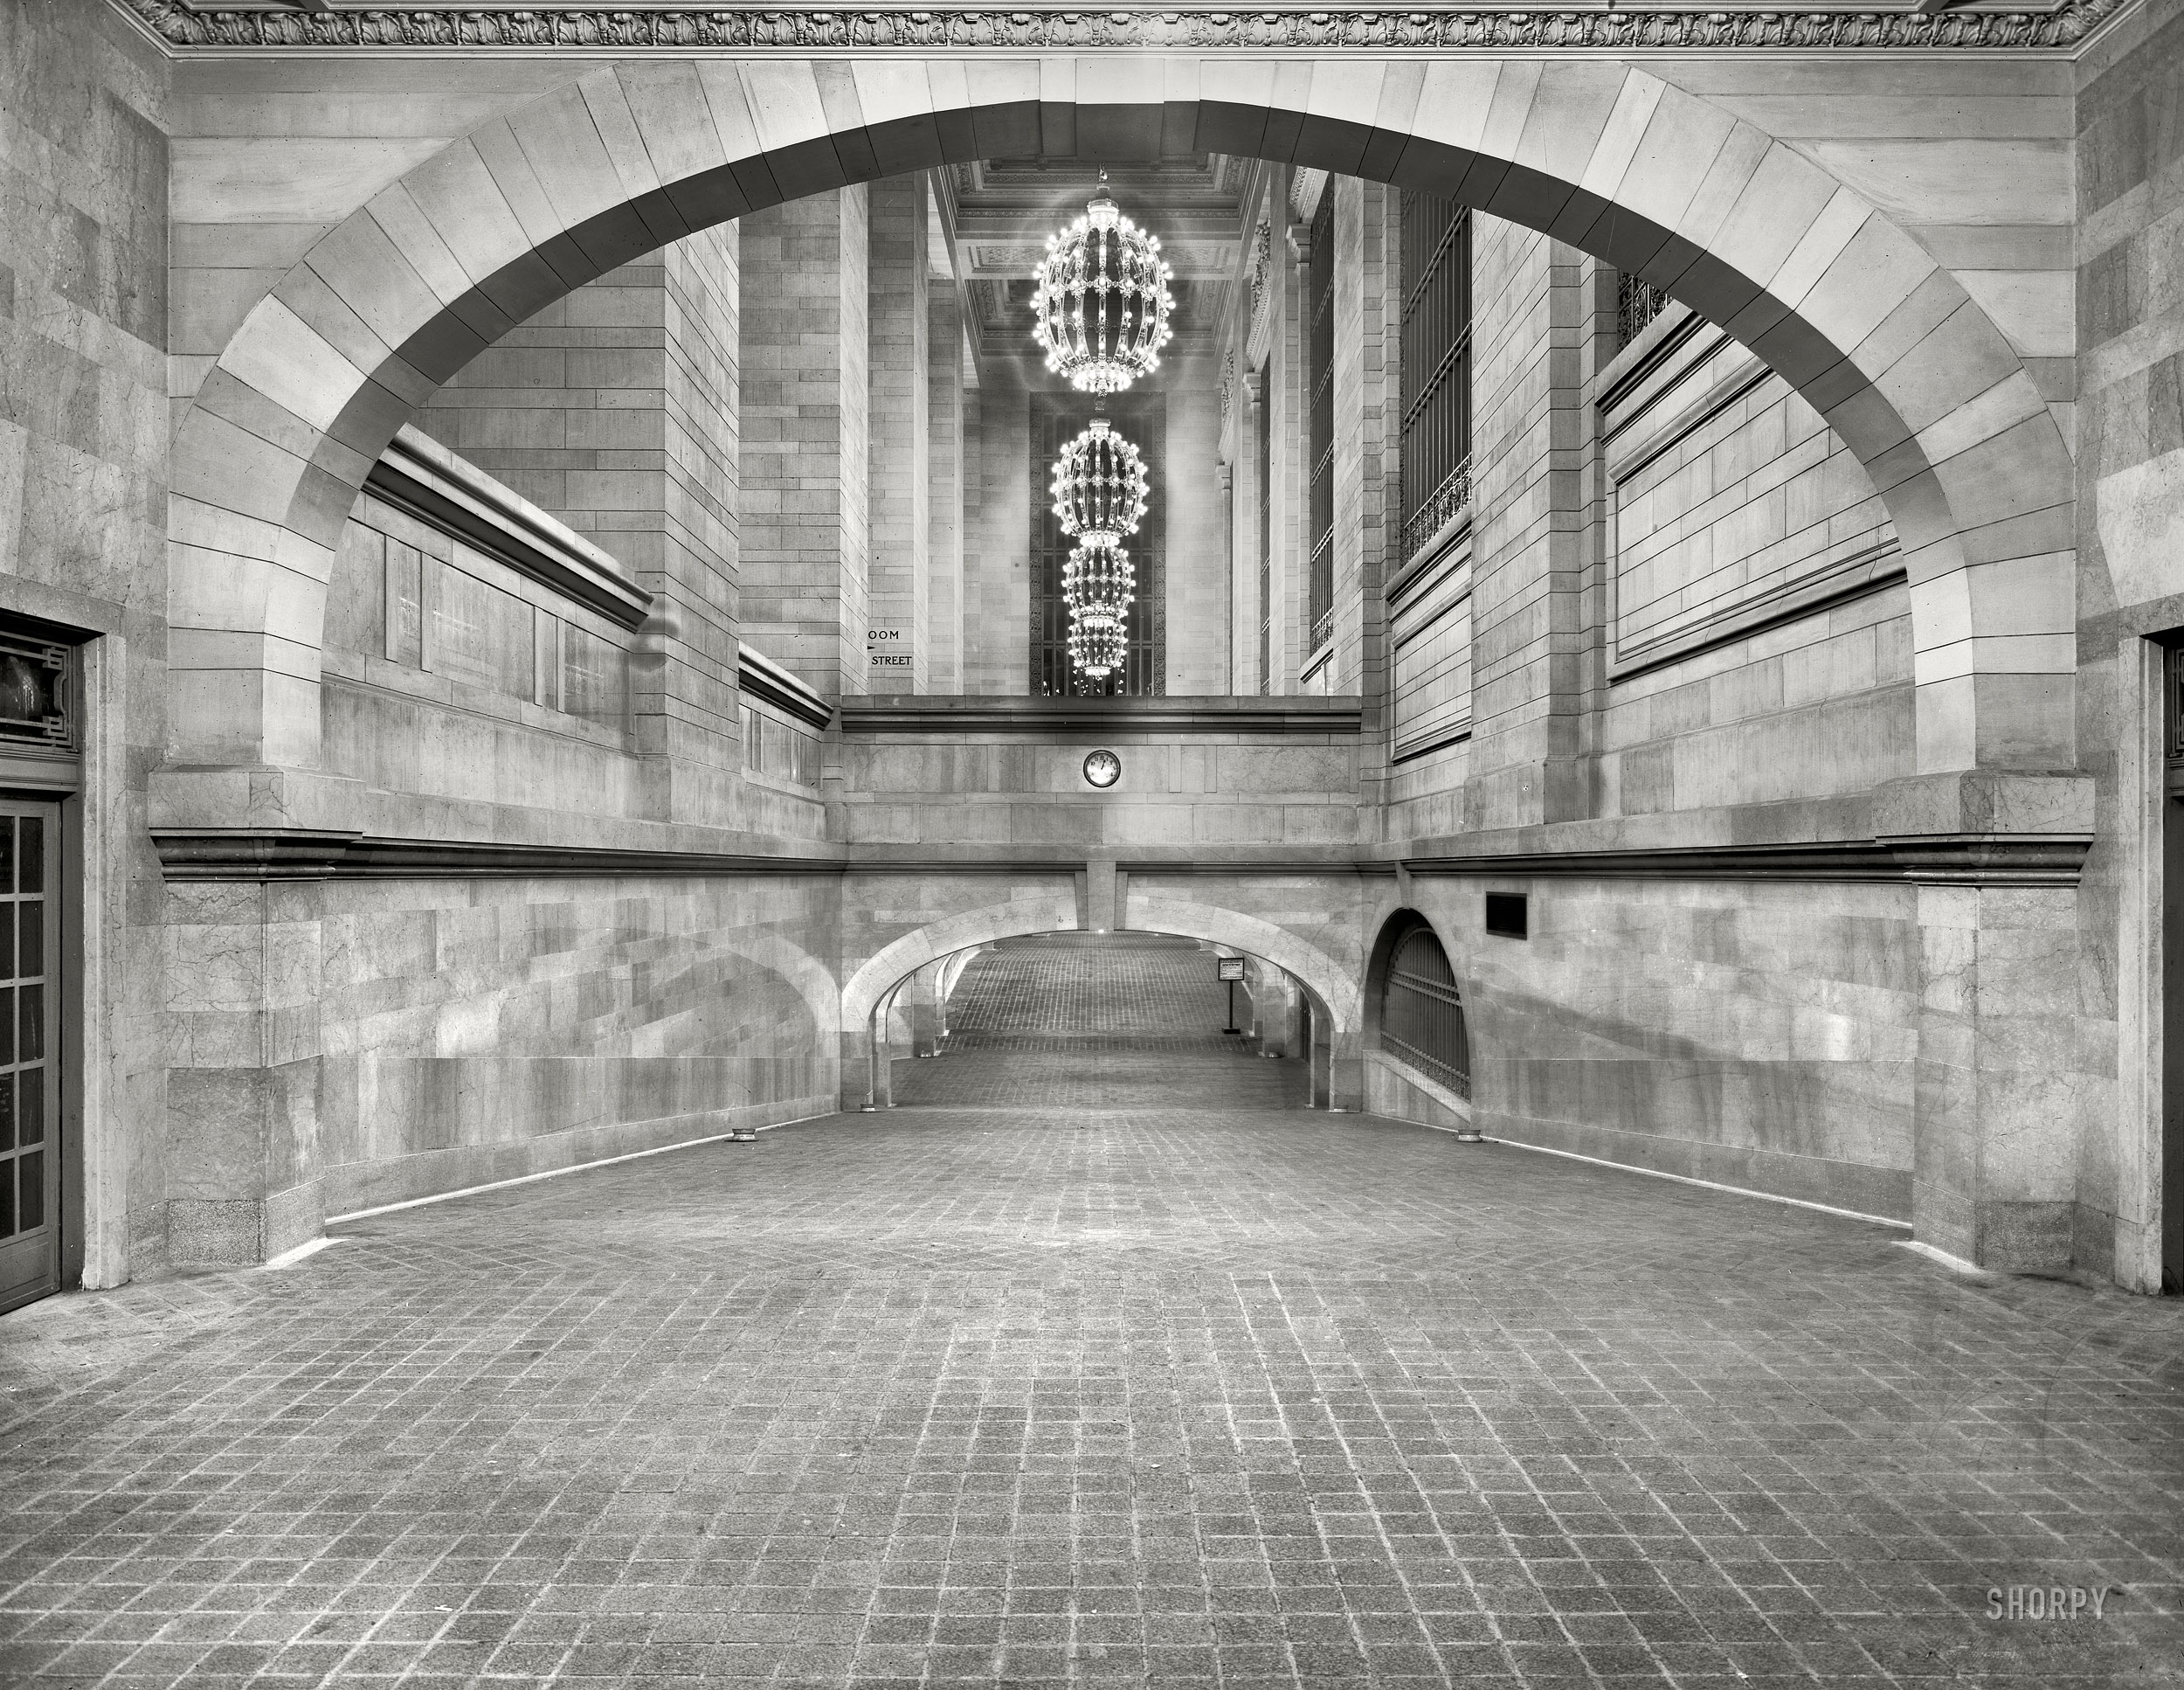 New York circa 1910. "Incline from subway to suburban concourse, Grand Central Terminal." 8x10 glass negative, Detroit Publishing Co. View full size.